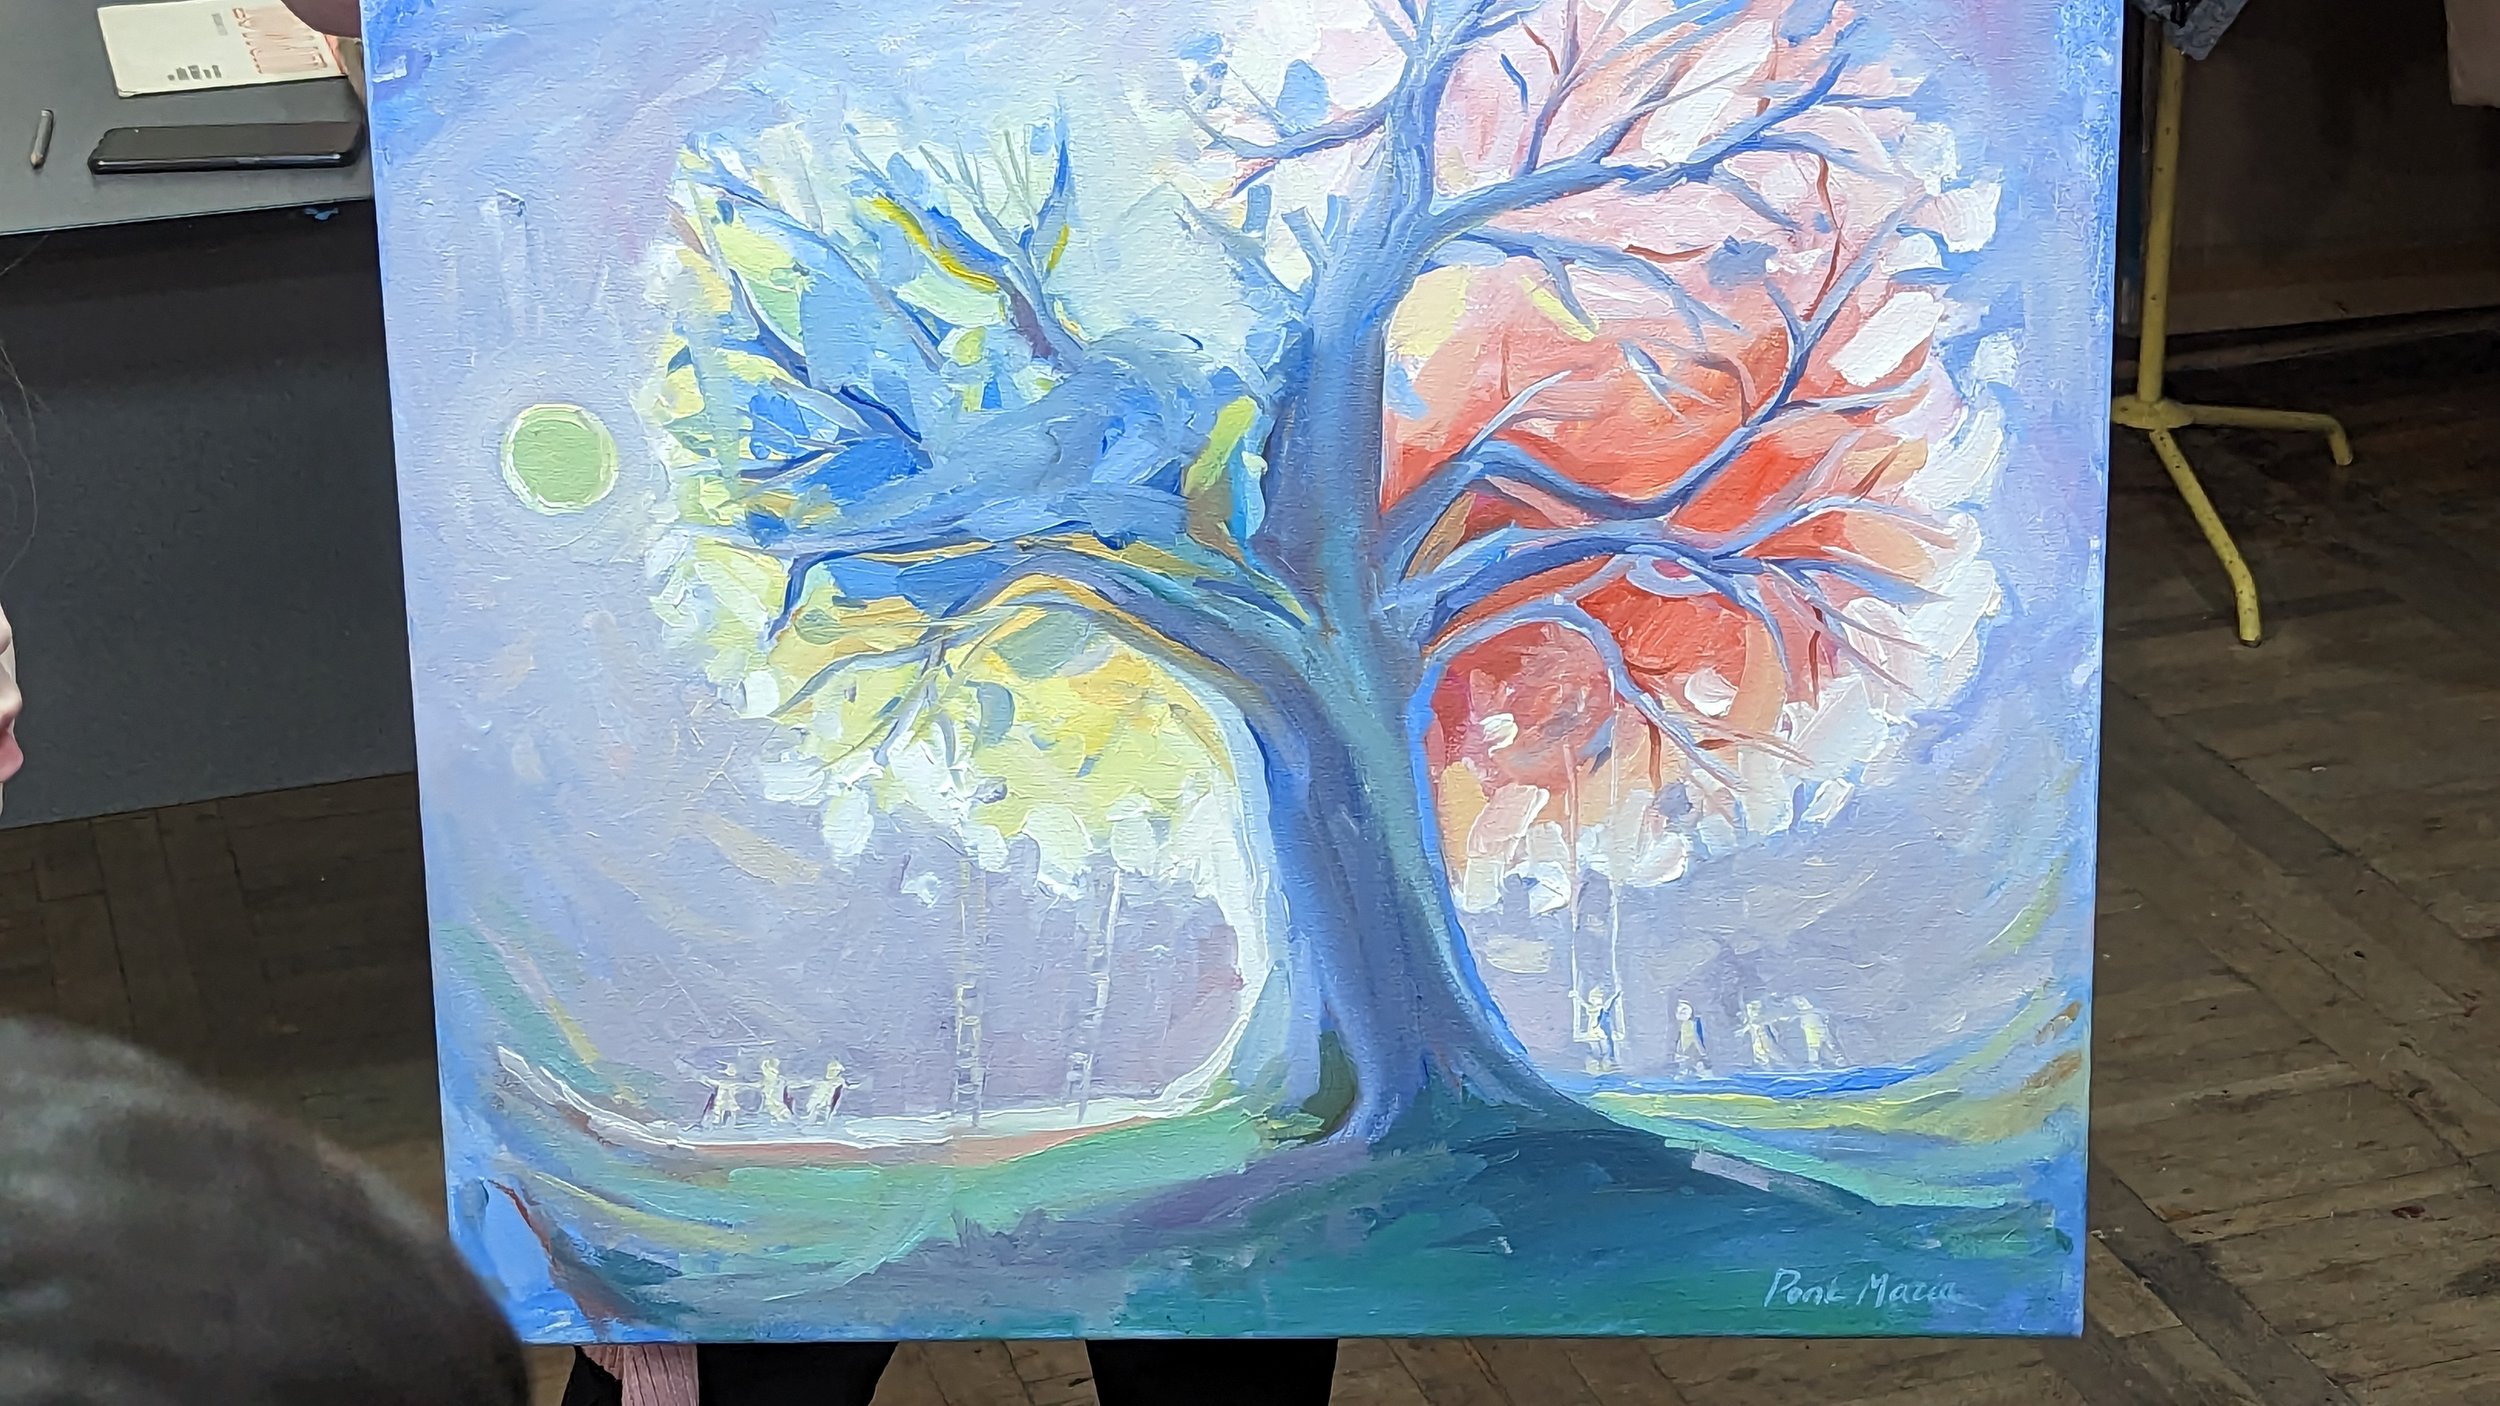 This piece depicts the Tree of Life &amp; the relationship b/w Ukraine (blue &amp; yellow on left) and Poland (red&amp;white on right).  This was selected to be presented to Polish President Duda.